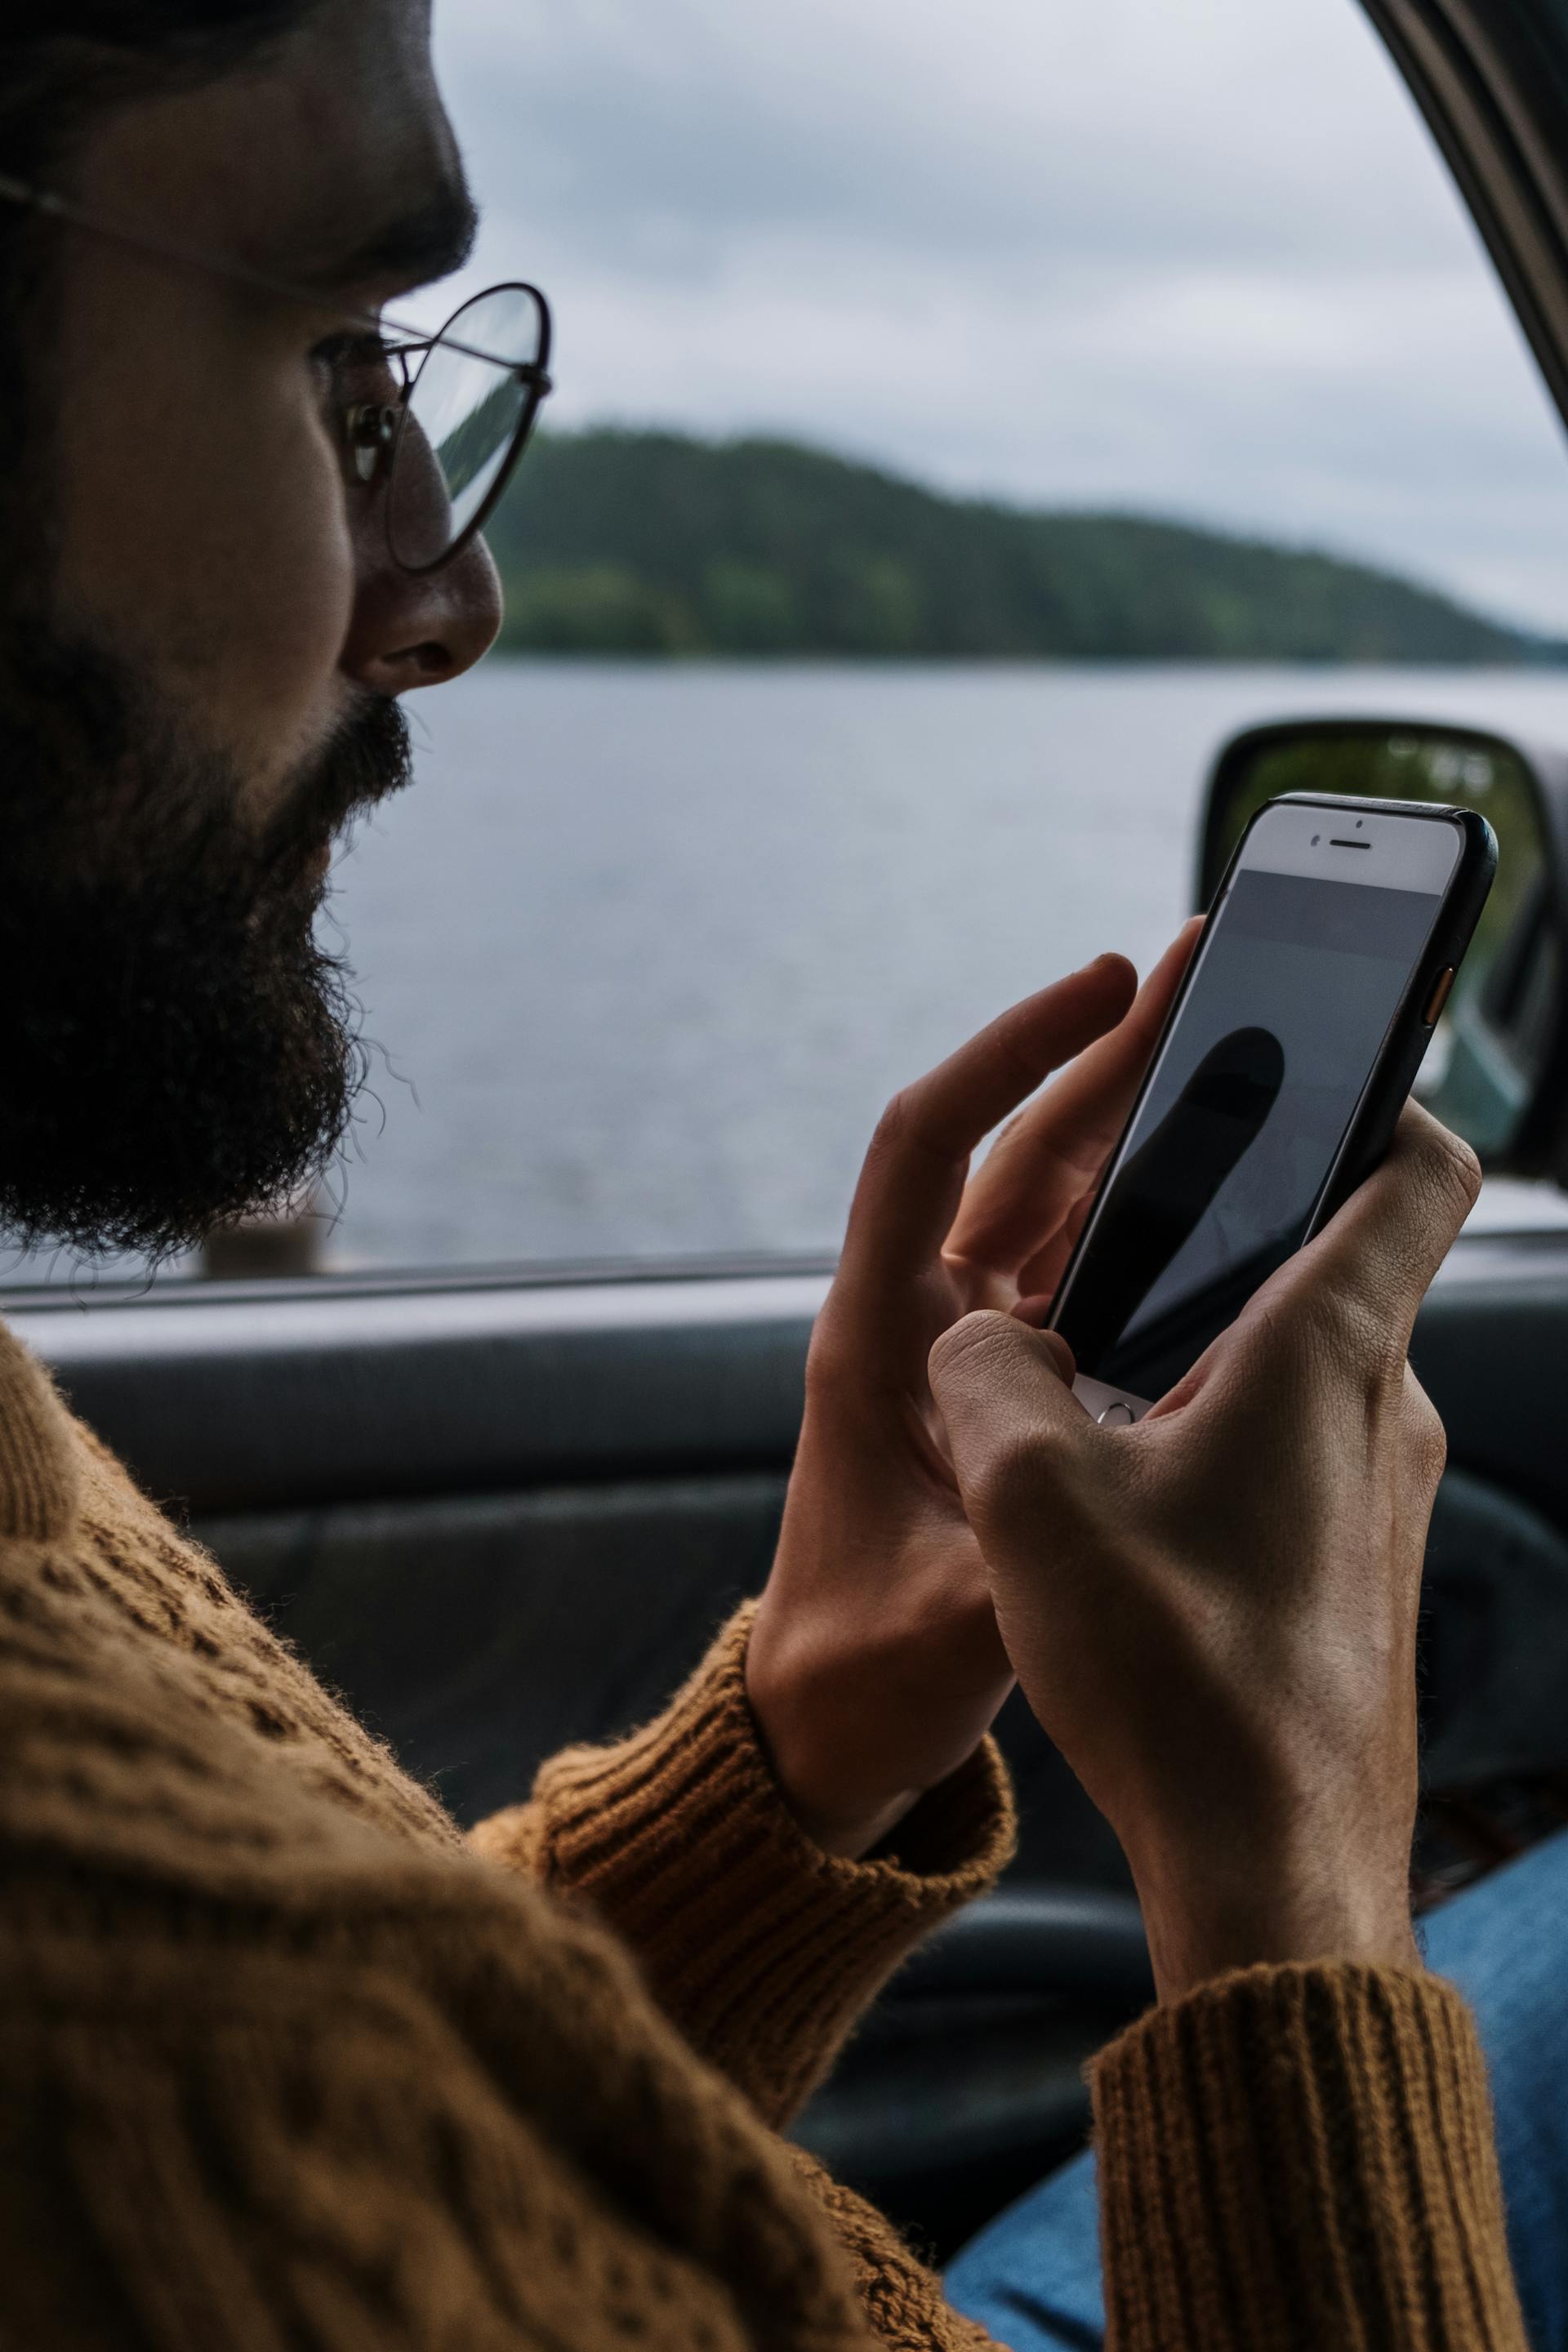 A man inside a car texting on his phone | Source: Pexels